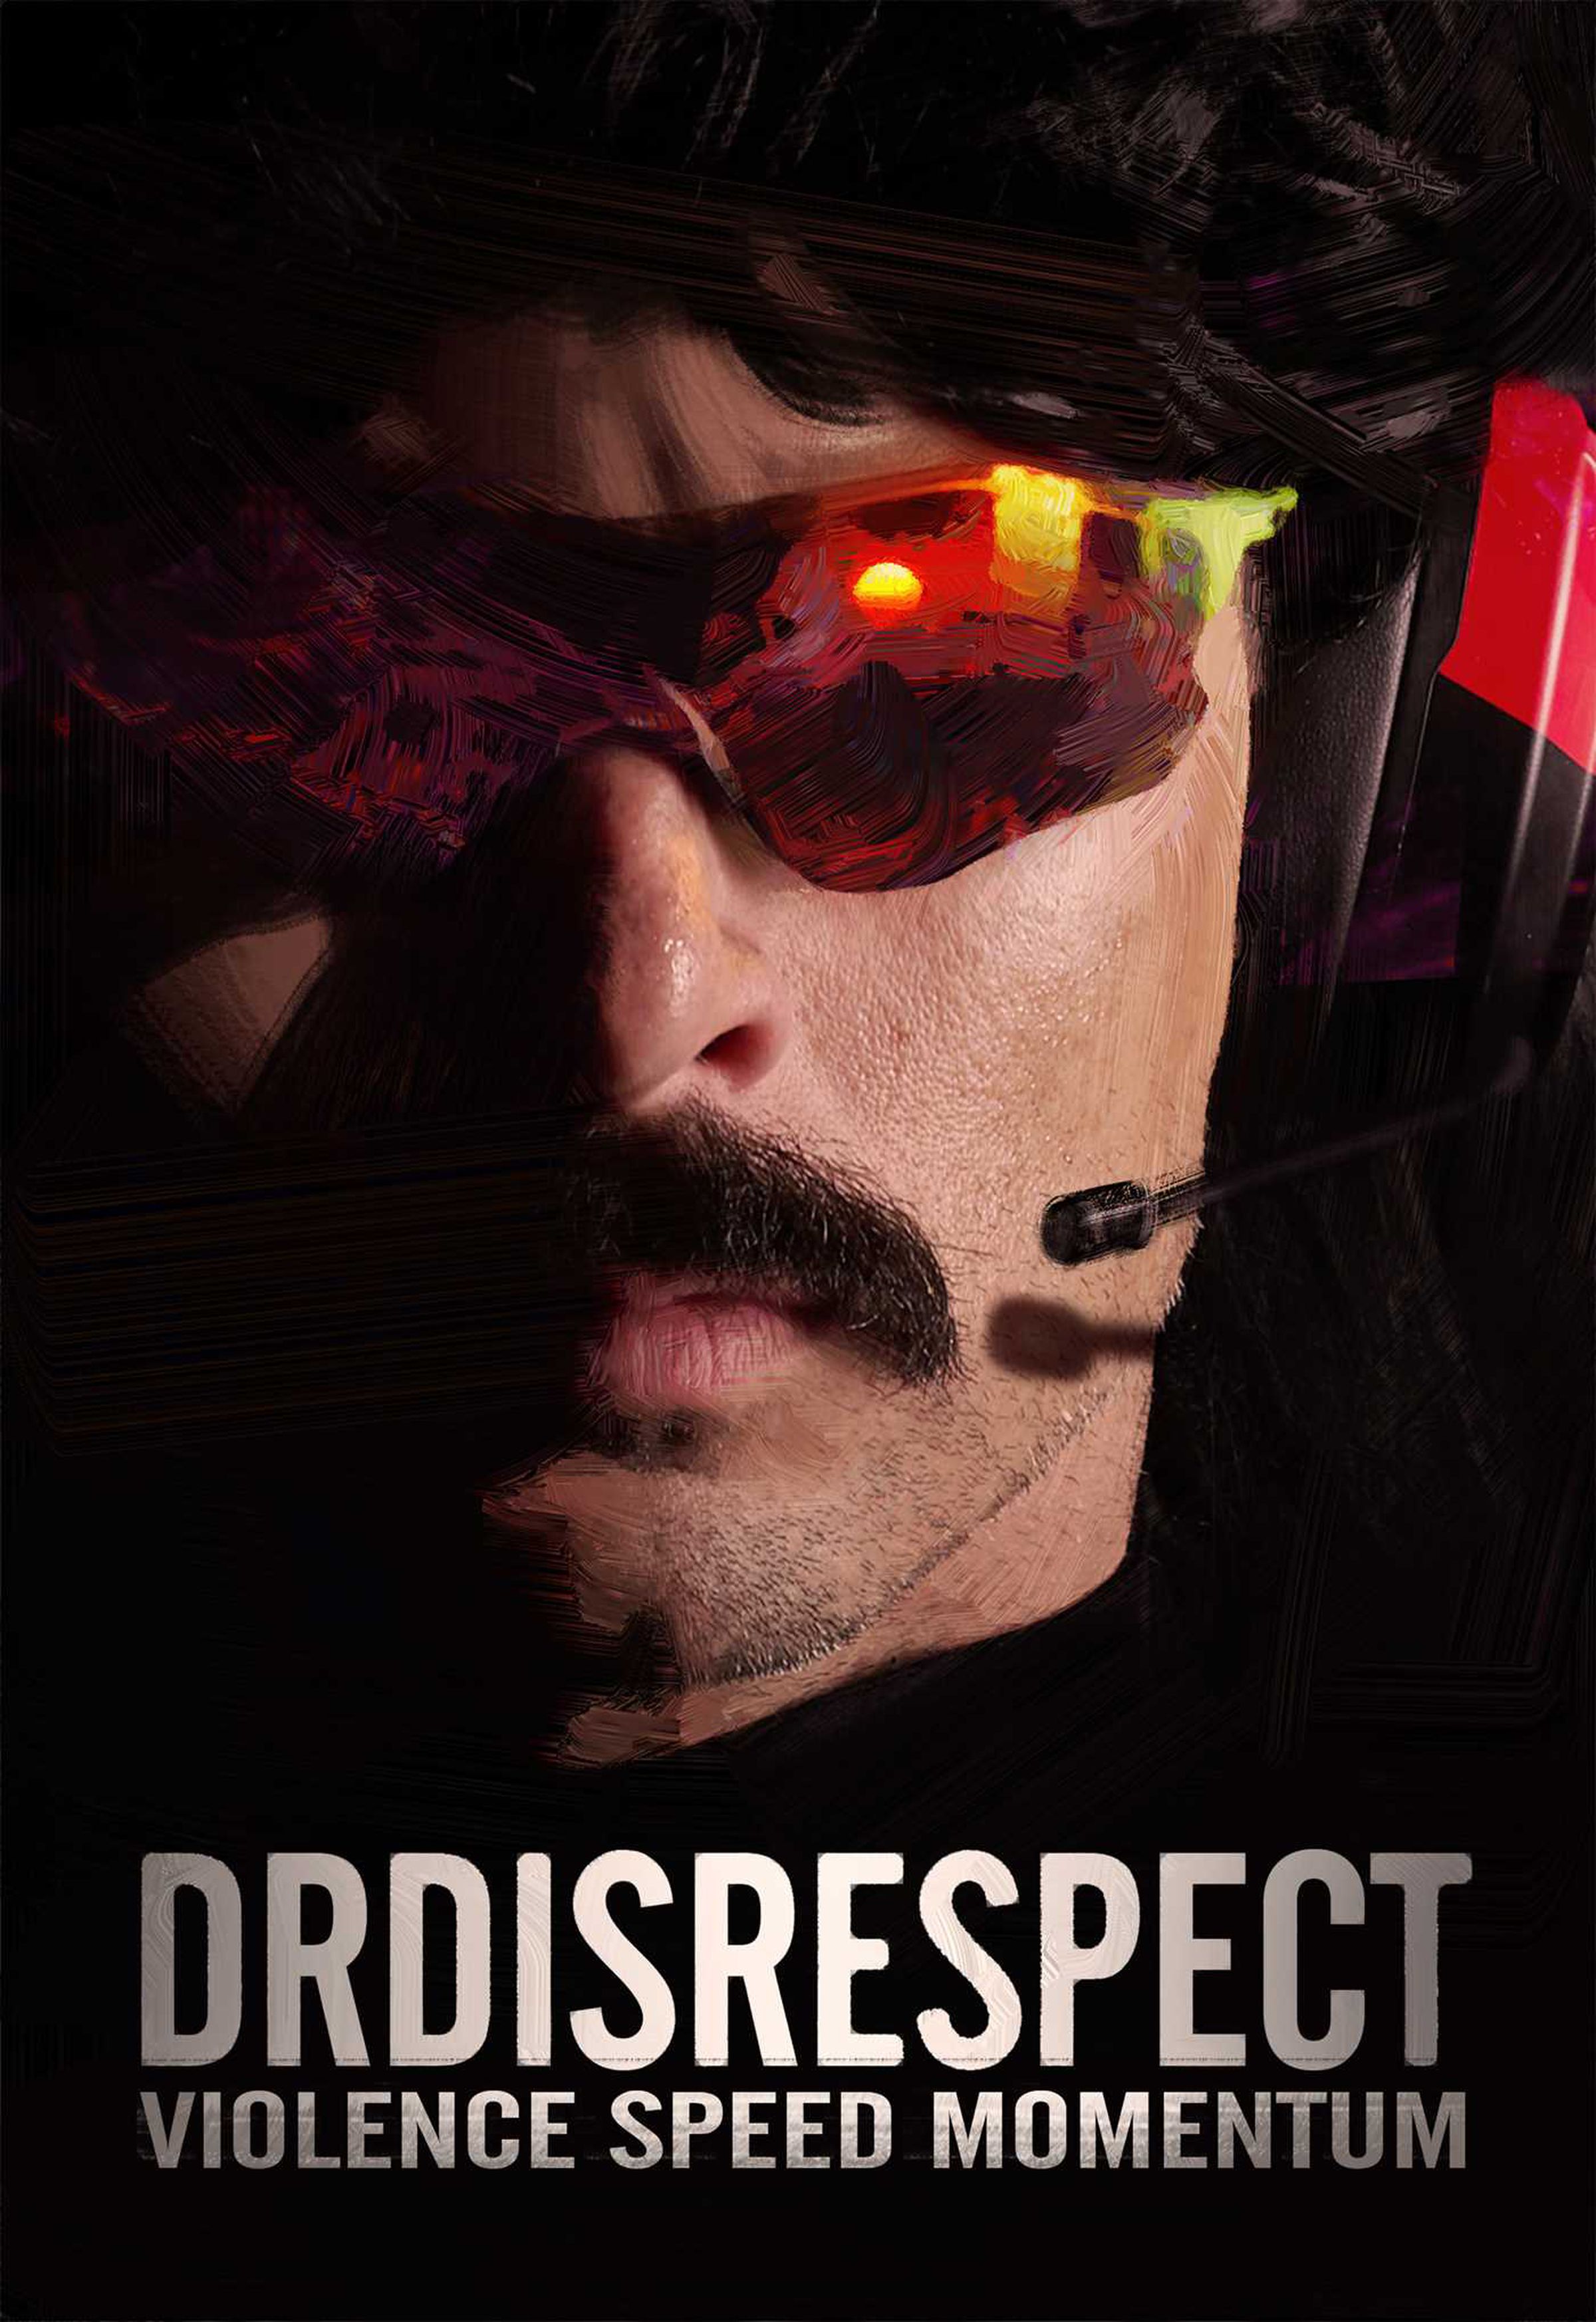 Here’s what the cover looks like for Dr Disrespect’s memoir.